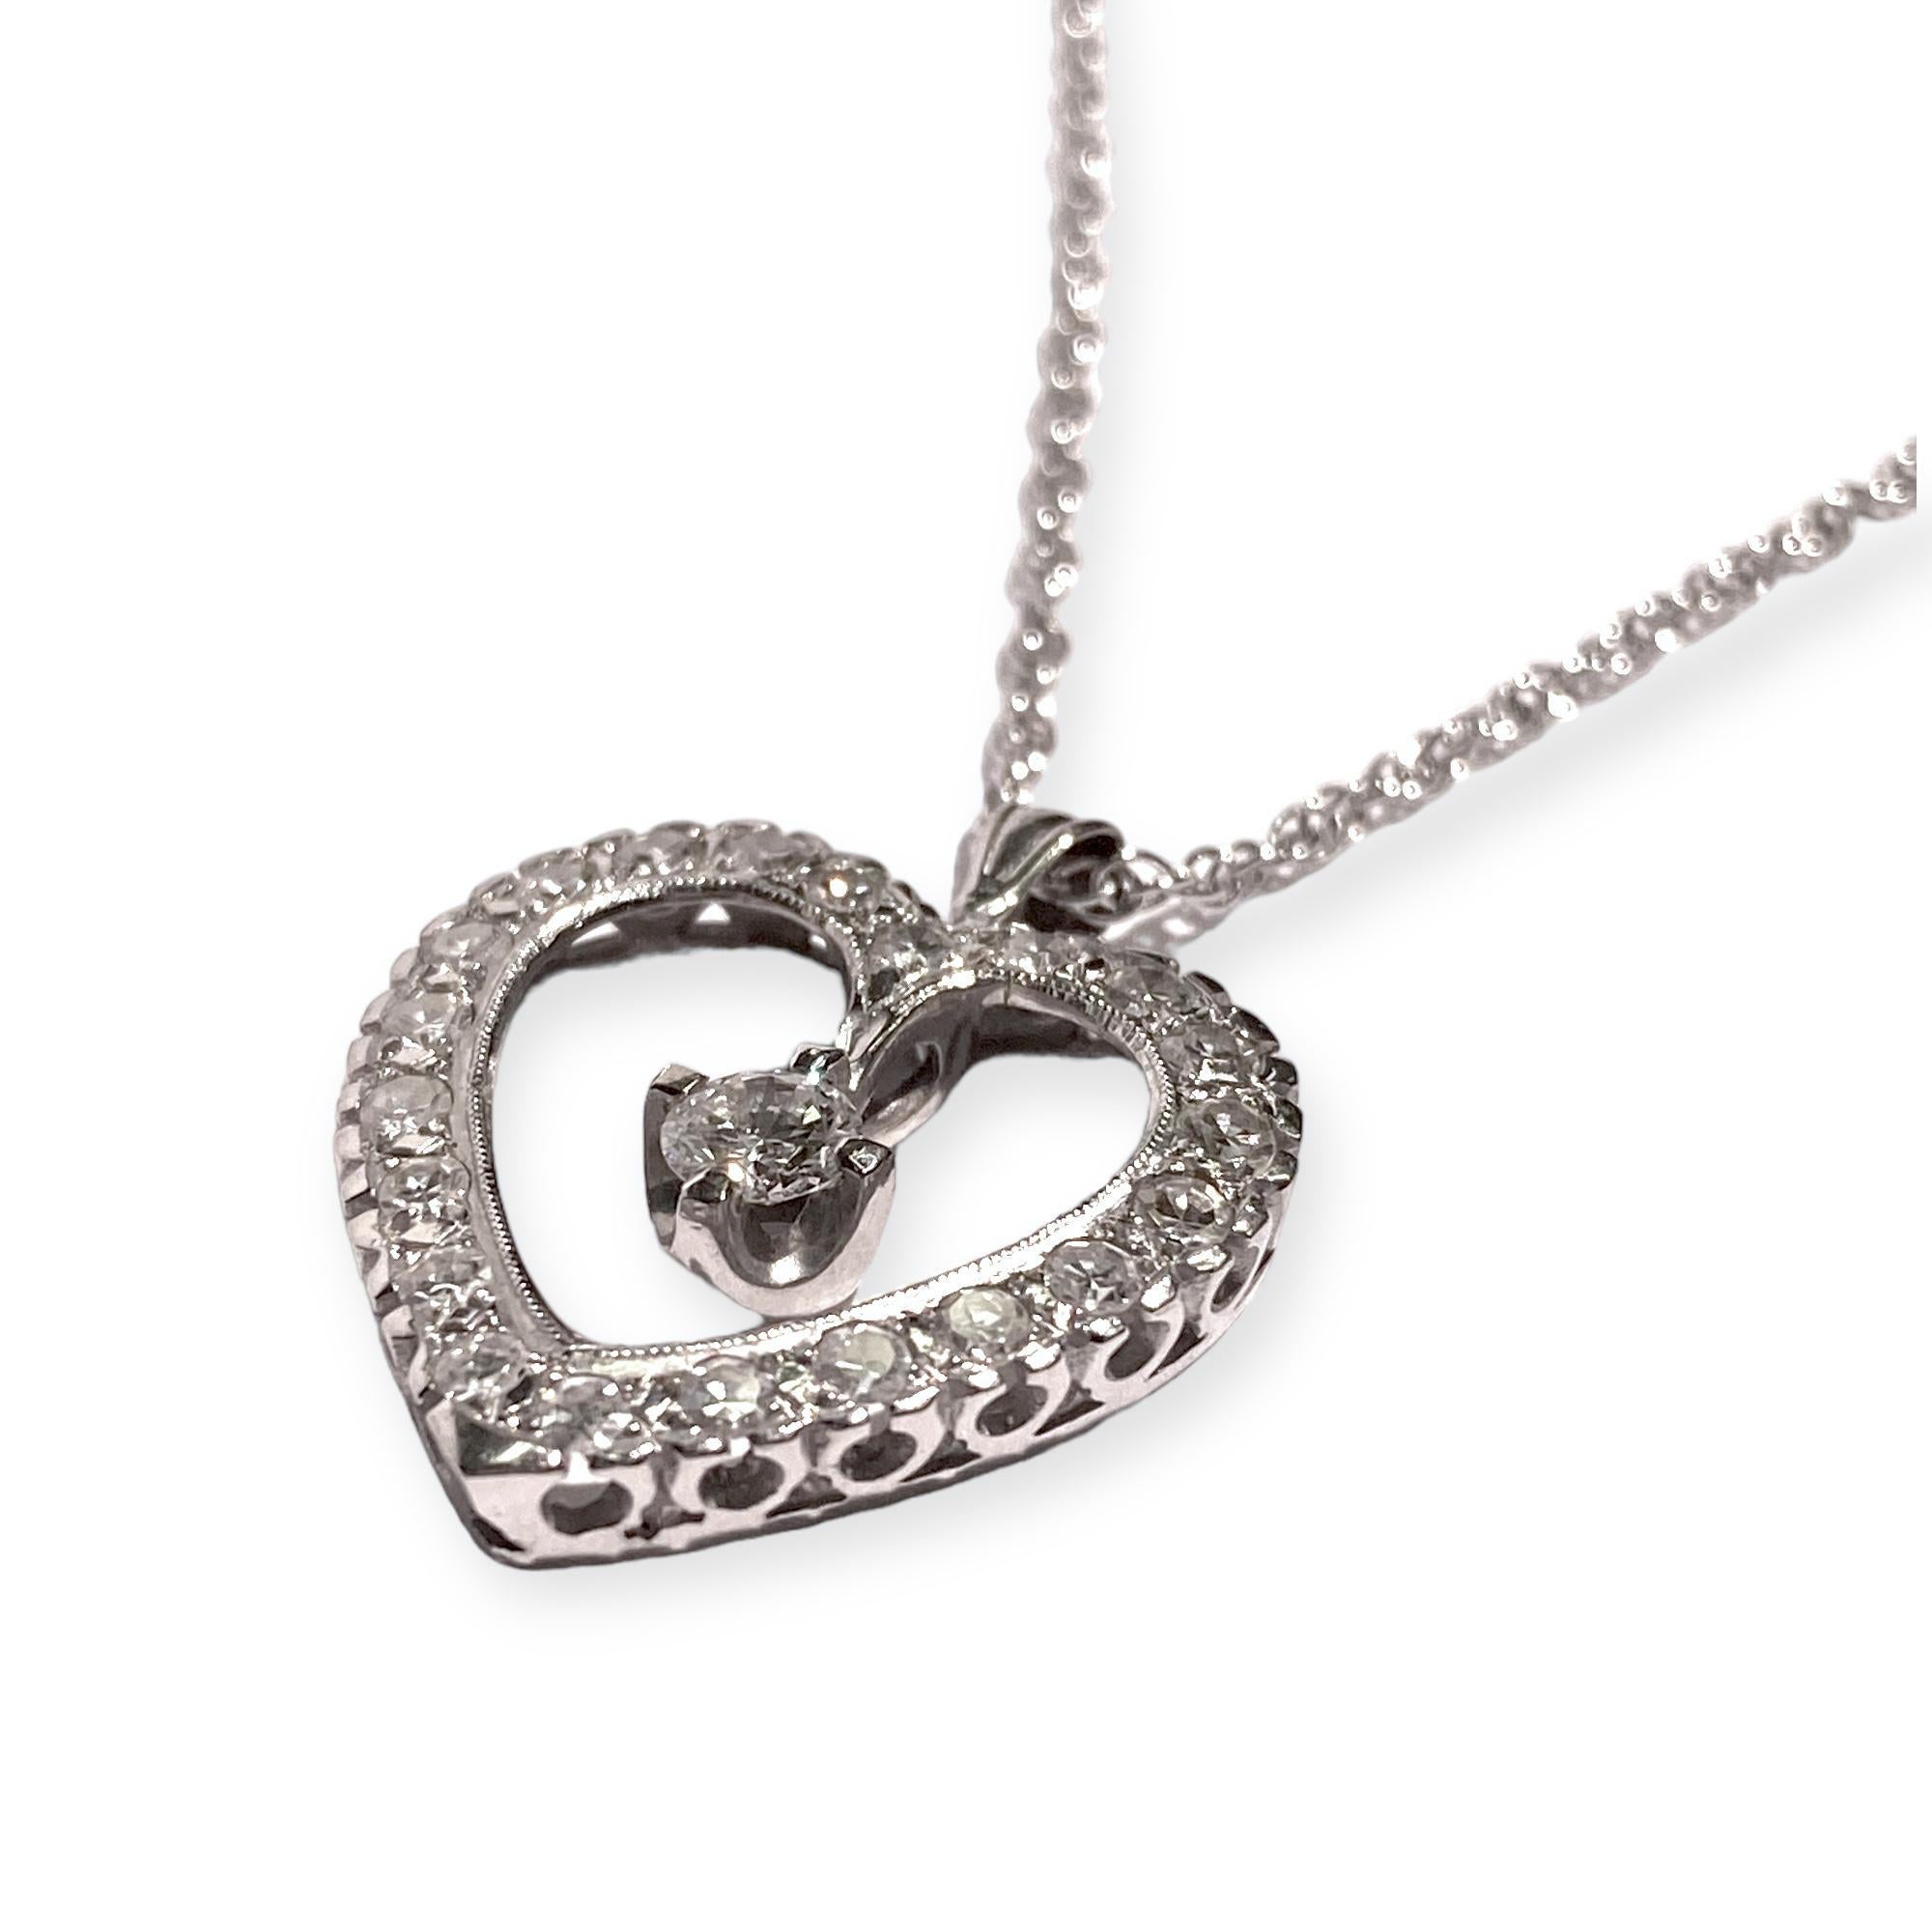 Crafted in 14K white gold, the pendant features a diamond set open heart design with a floating diamond solitaire in the center, supported by a twenty four inch twisted rope style chain with spring ring clasp.
1 round brilliant cut diamonds: